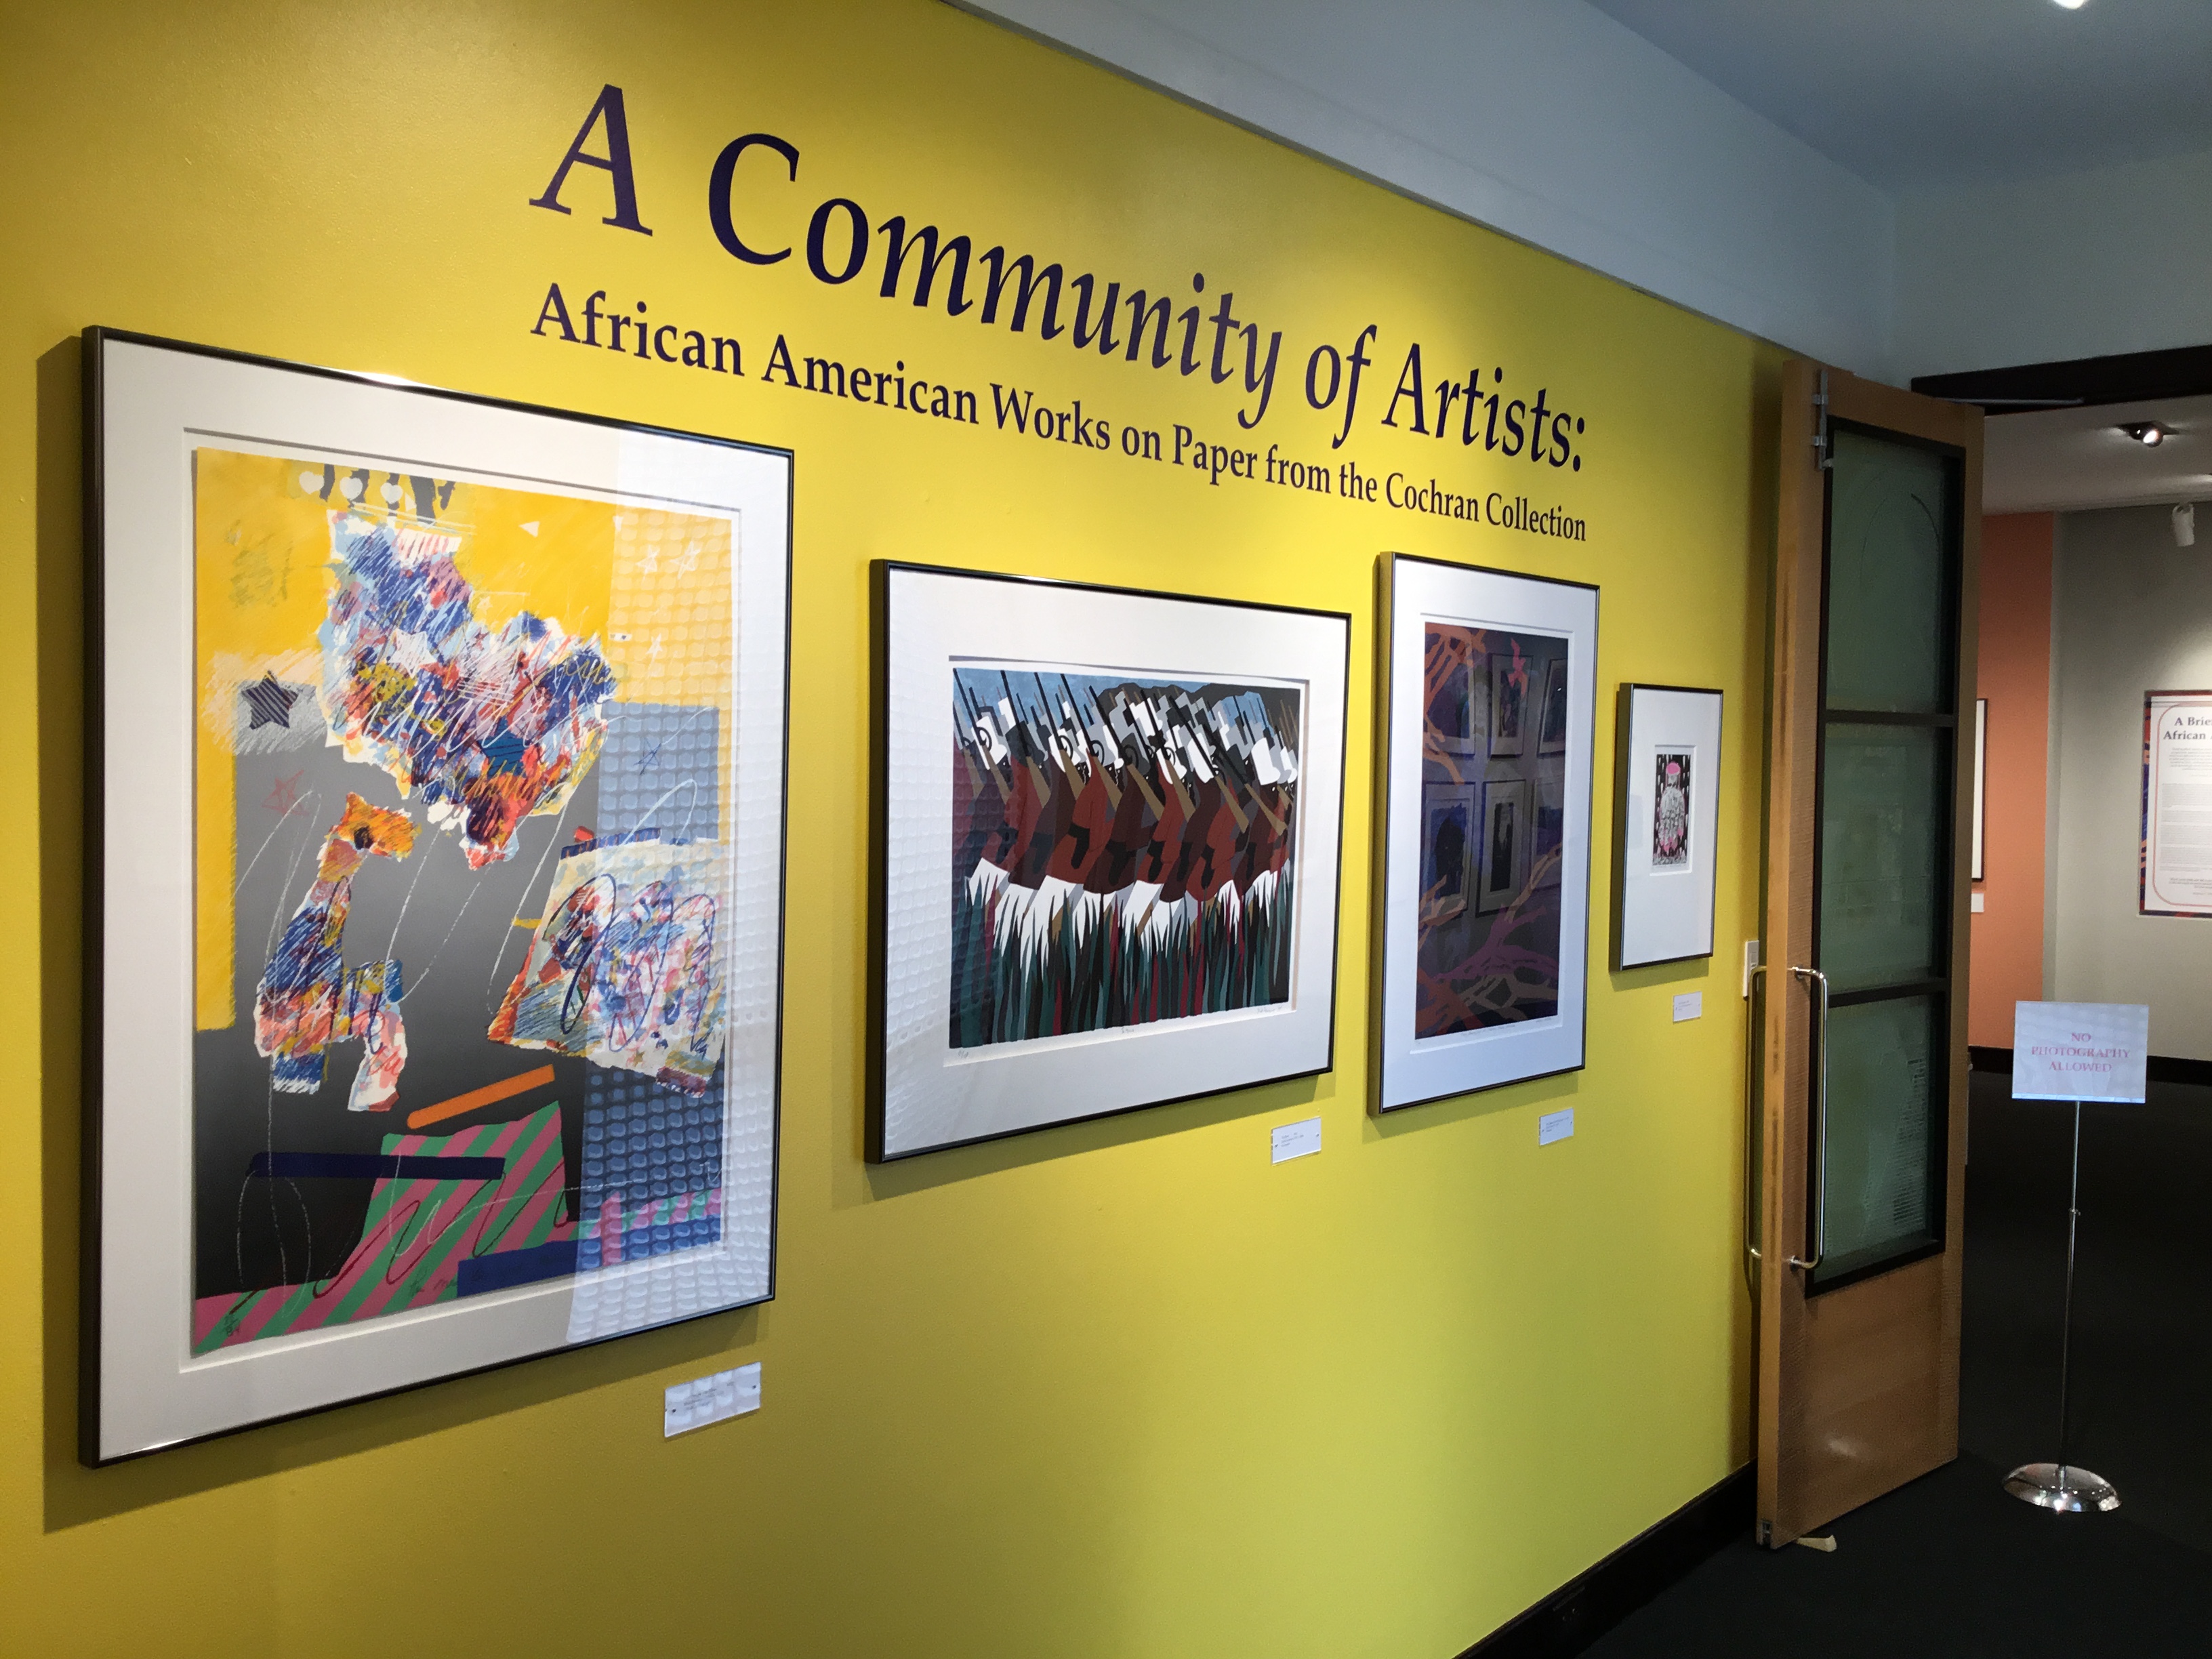 An image of the title wall of the gallery, with large, deep purple text on a yellow background with four framed pieces underneath. The text reads “A Community of Artists: African American Works on Paper from the Cochran Collection.”